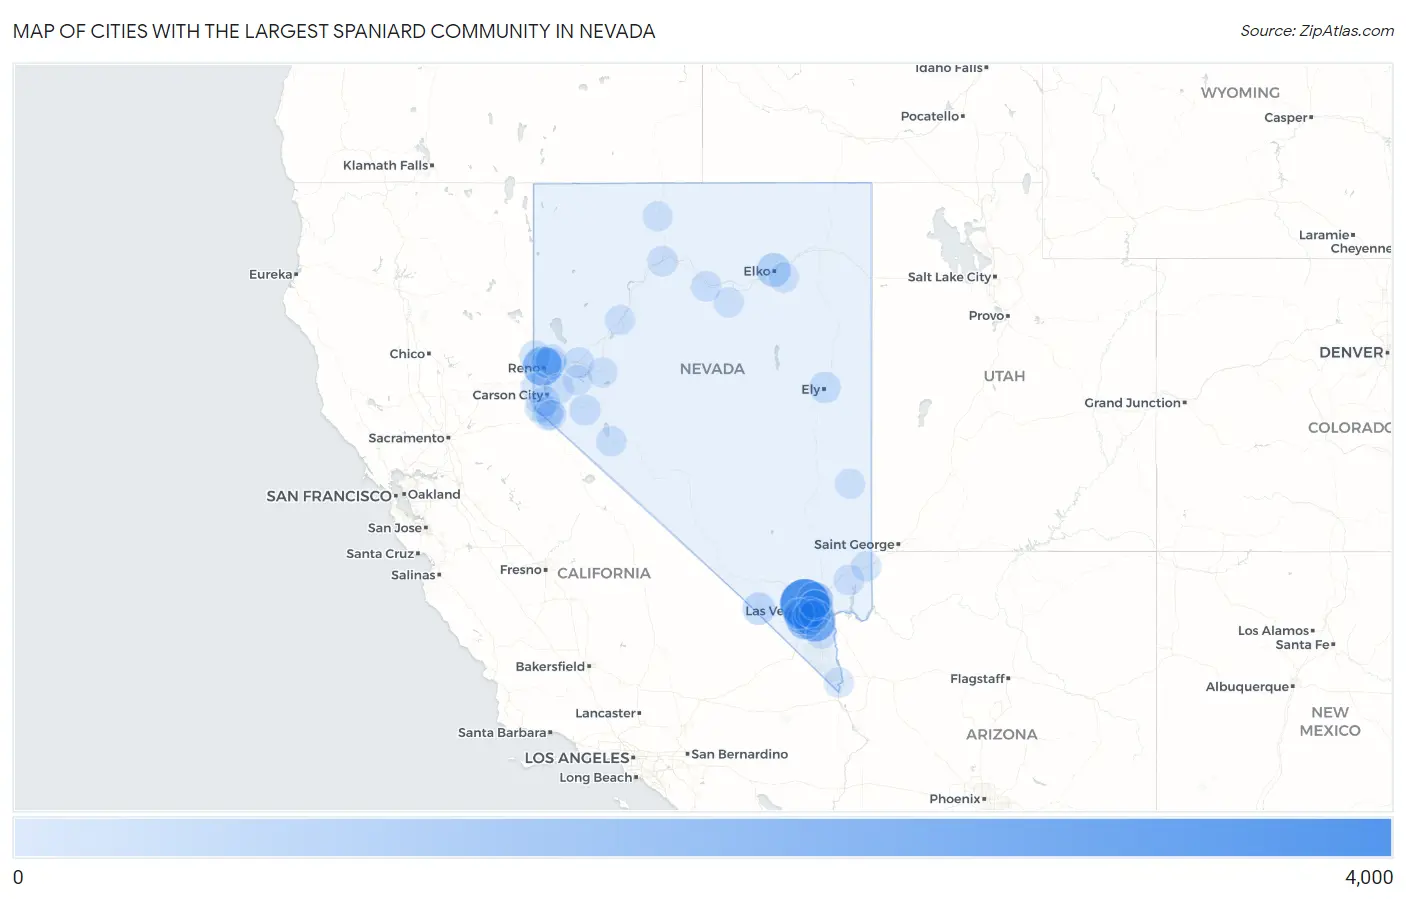 Cities with the Largest Spaniard Community in Nevada Map